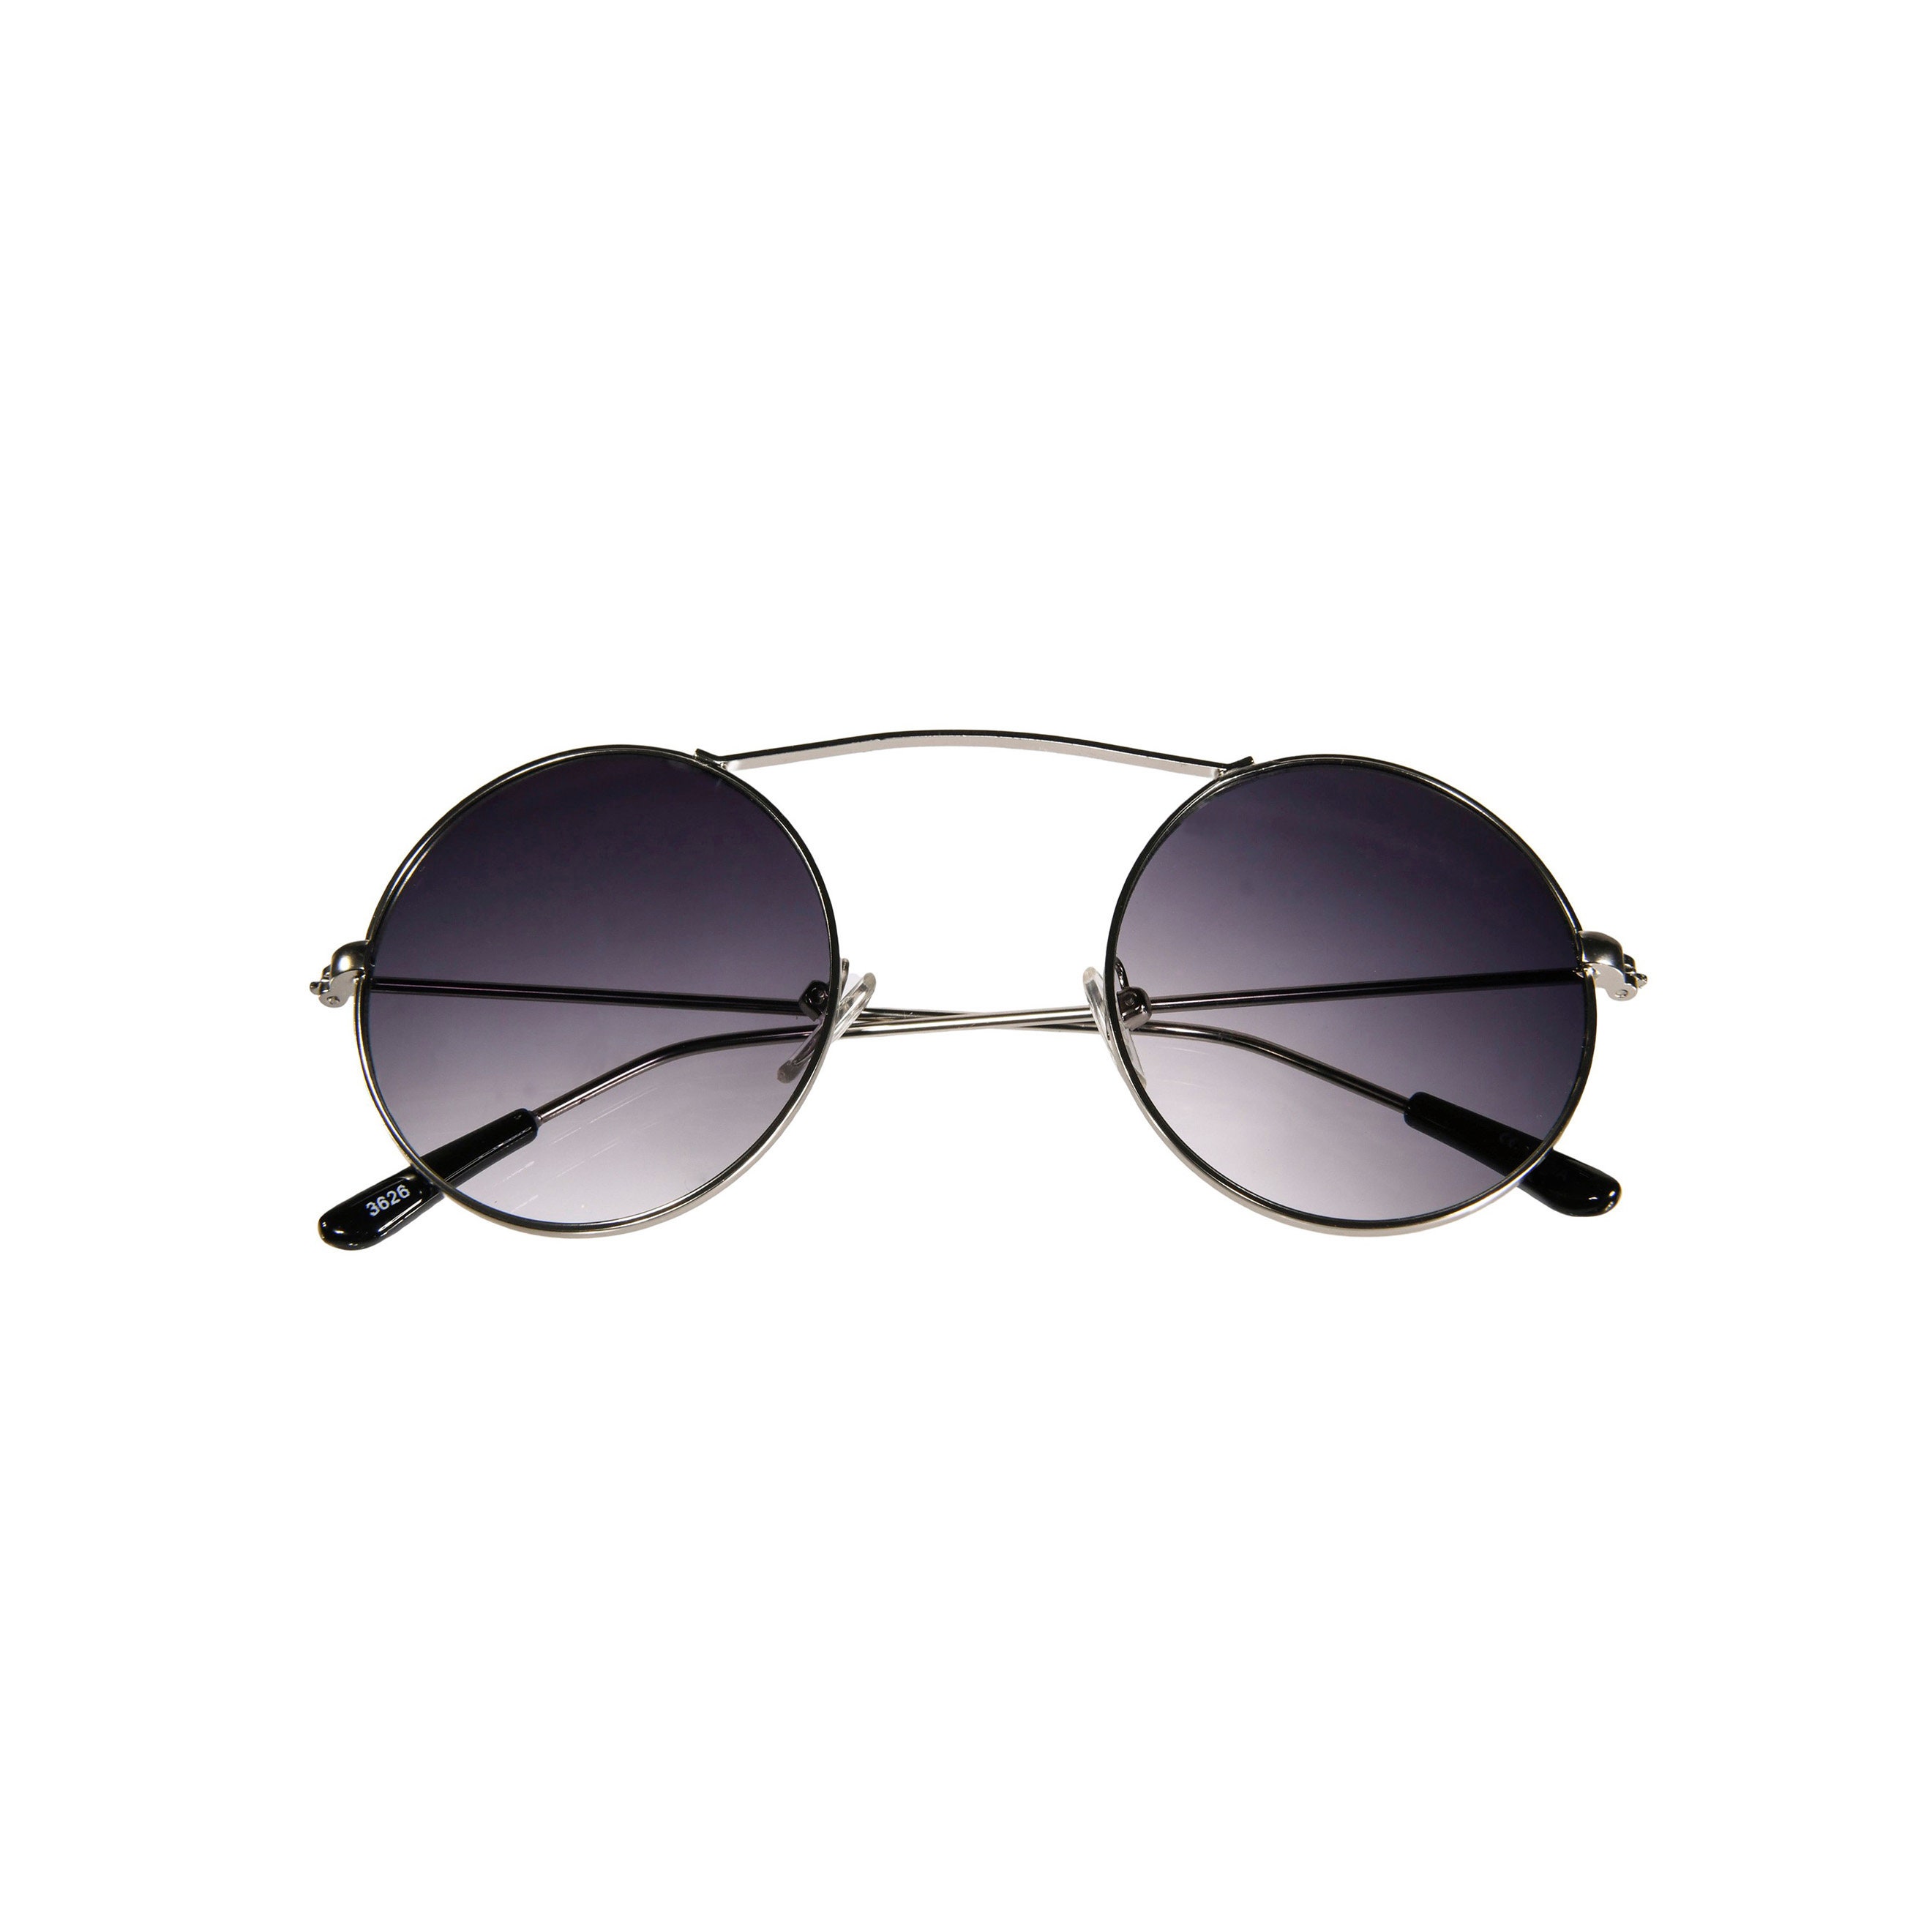 Buy mincl/punk Small Chic Fashion Vintage Round Sunglasses Metal Frame  (black) at Amazon.in